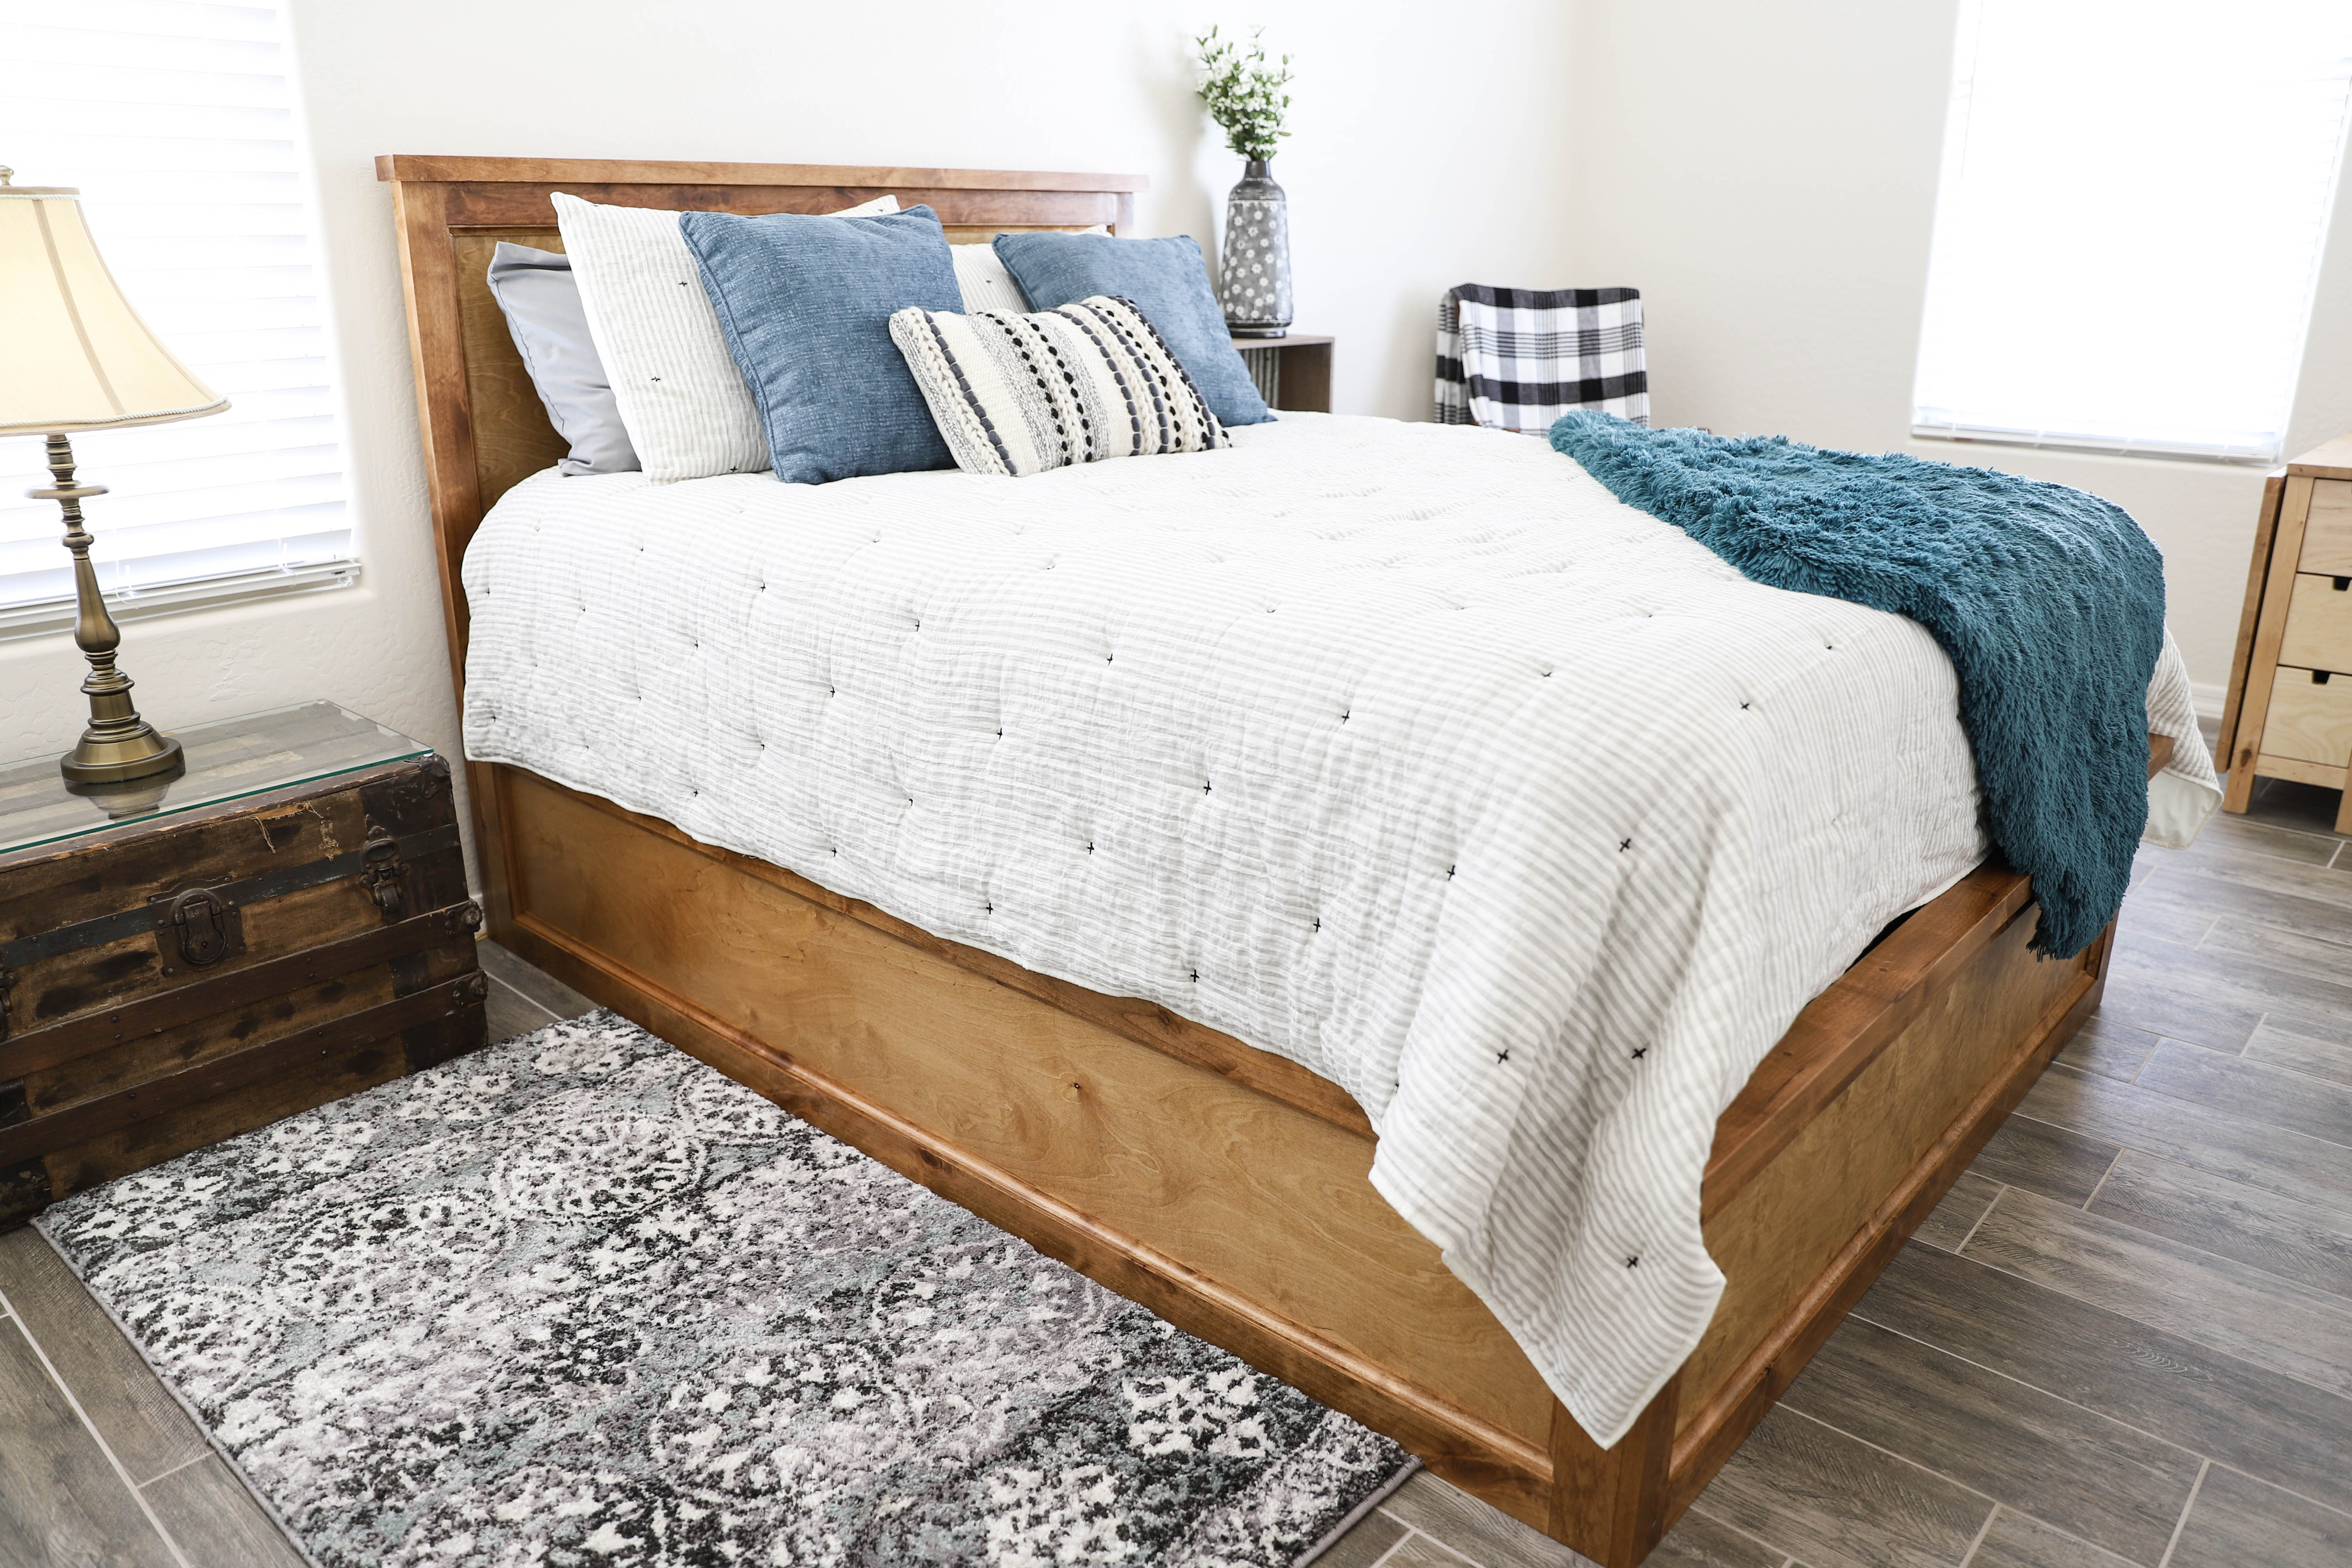 How To Build A Queen Size Storage Bed, New Bed Frame Queen Size With Storage